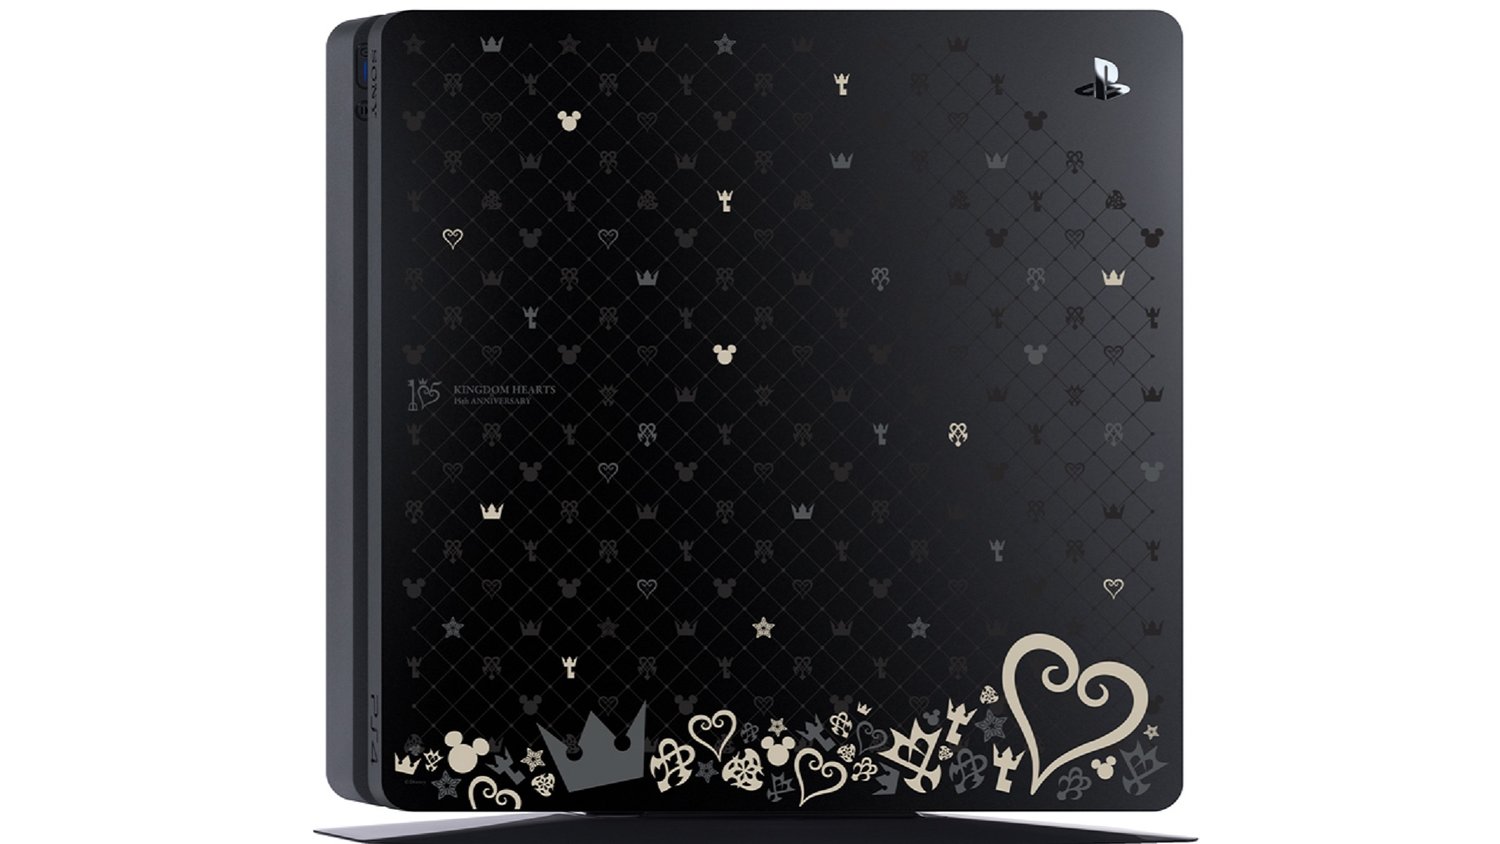 This Special Edition Kingdom Hearts Ps4 Is Simple And Clean Gametyrant